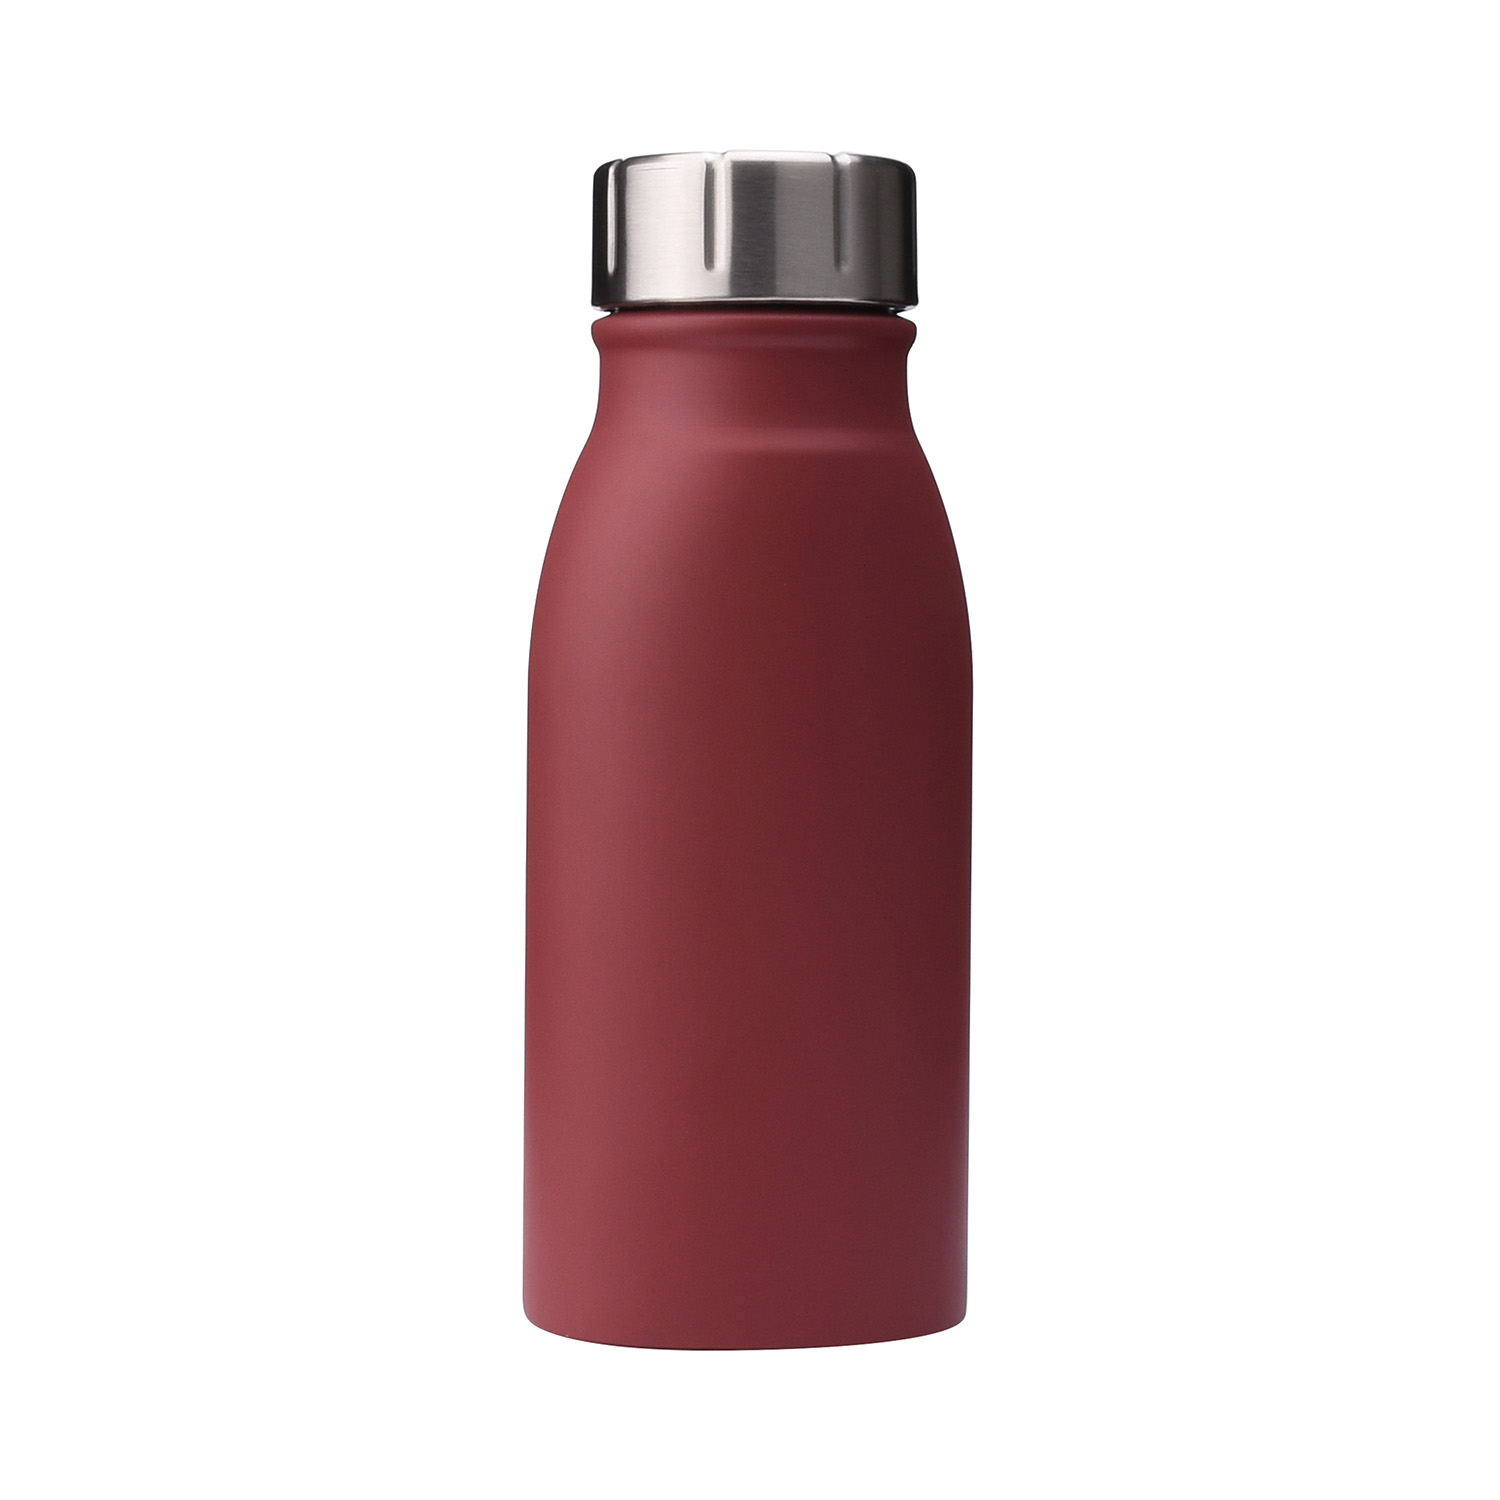 https://www.waterbottle.tech/wp-content/uploads/2021/11/insulated-flat-oval-square-stainless-steel-water-bottle-s11350a2-1.jpg